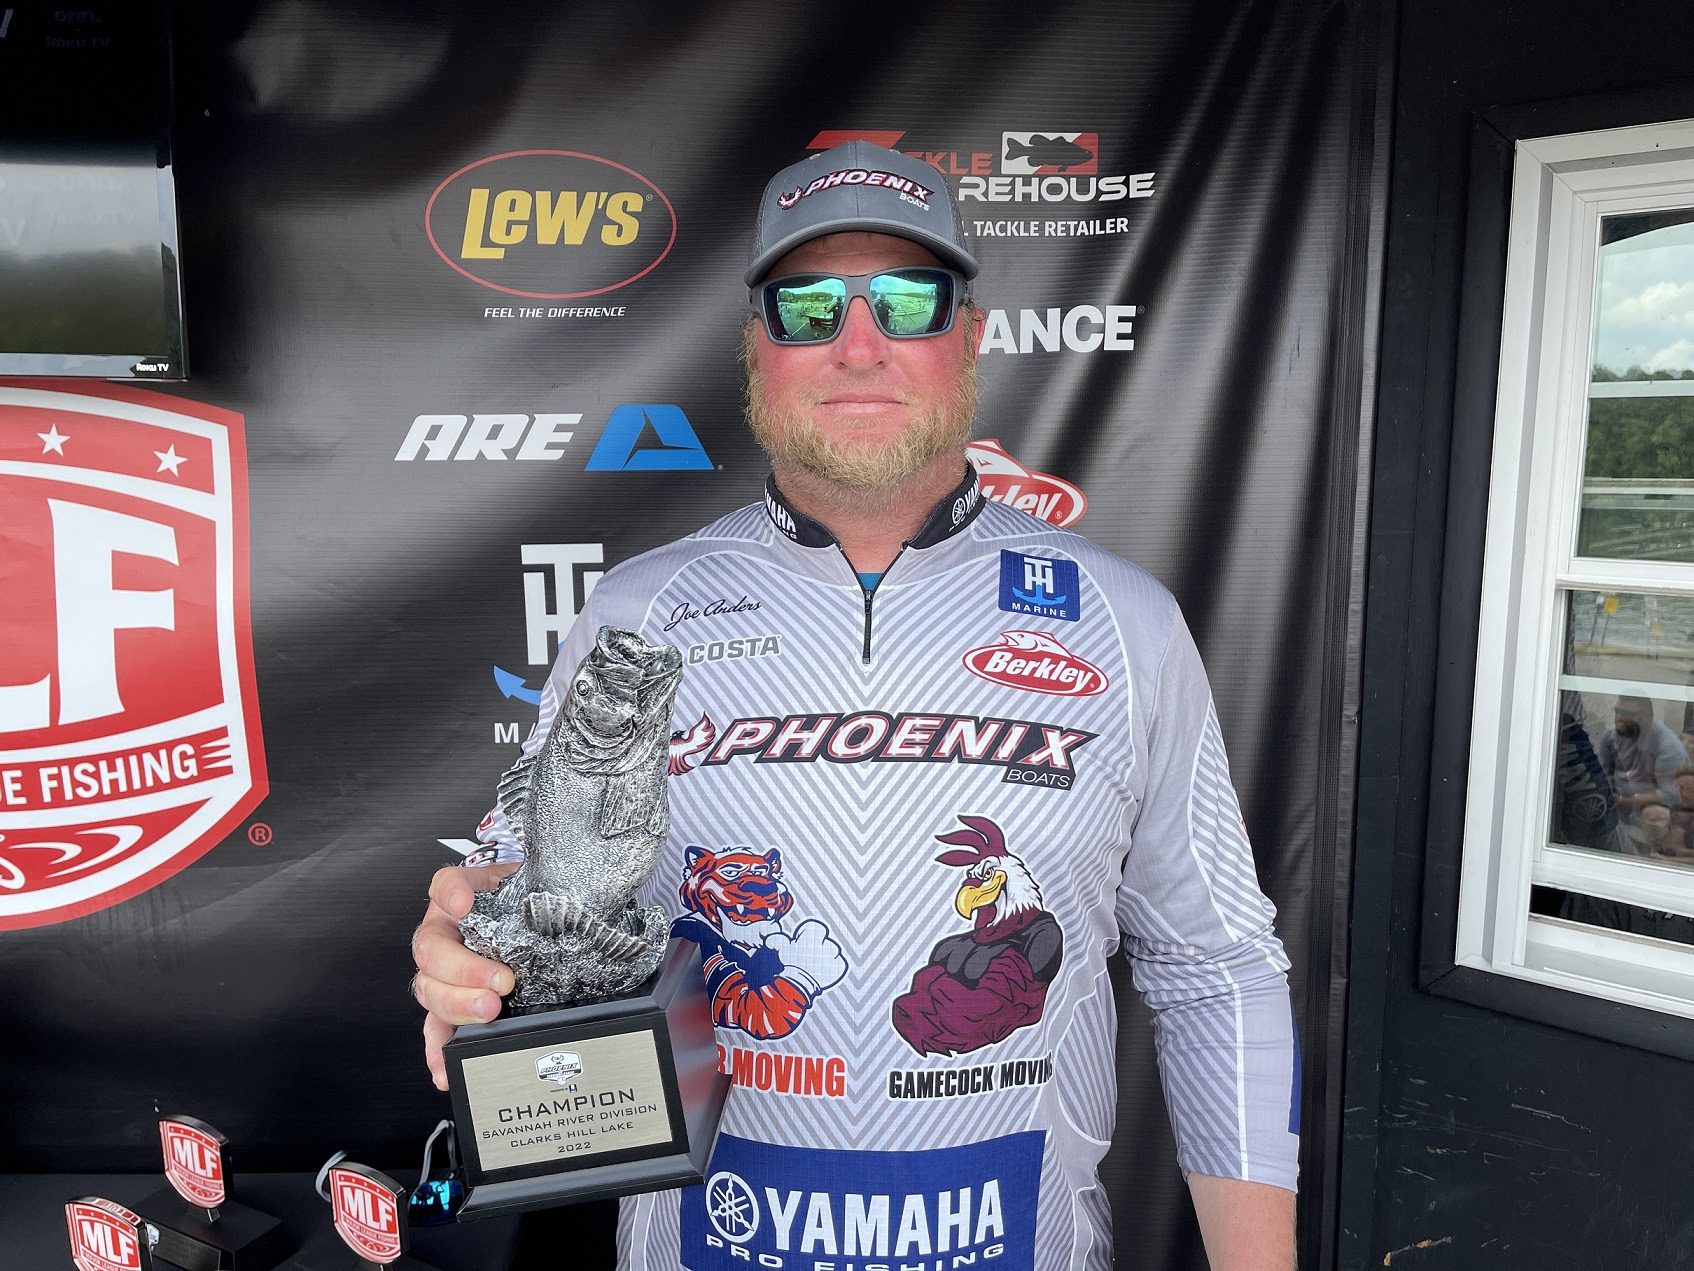 South Carolina’s Anders Claims Victory at Phoenix Bass Fishing League Event on Clarks Hill Lake